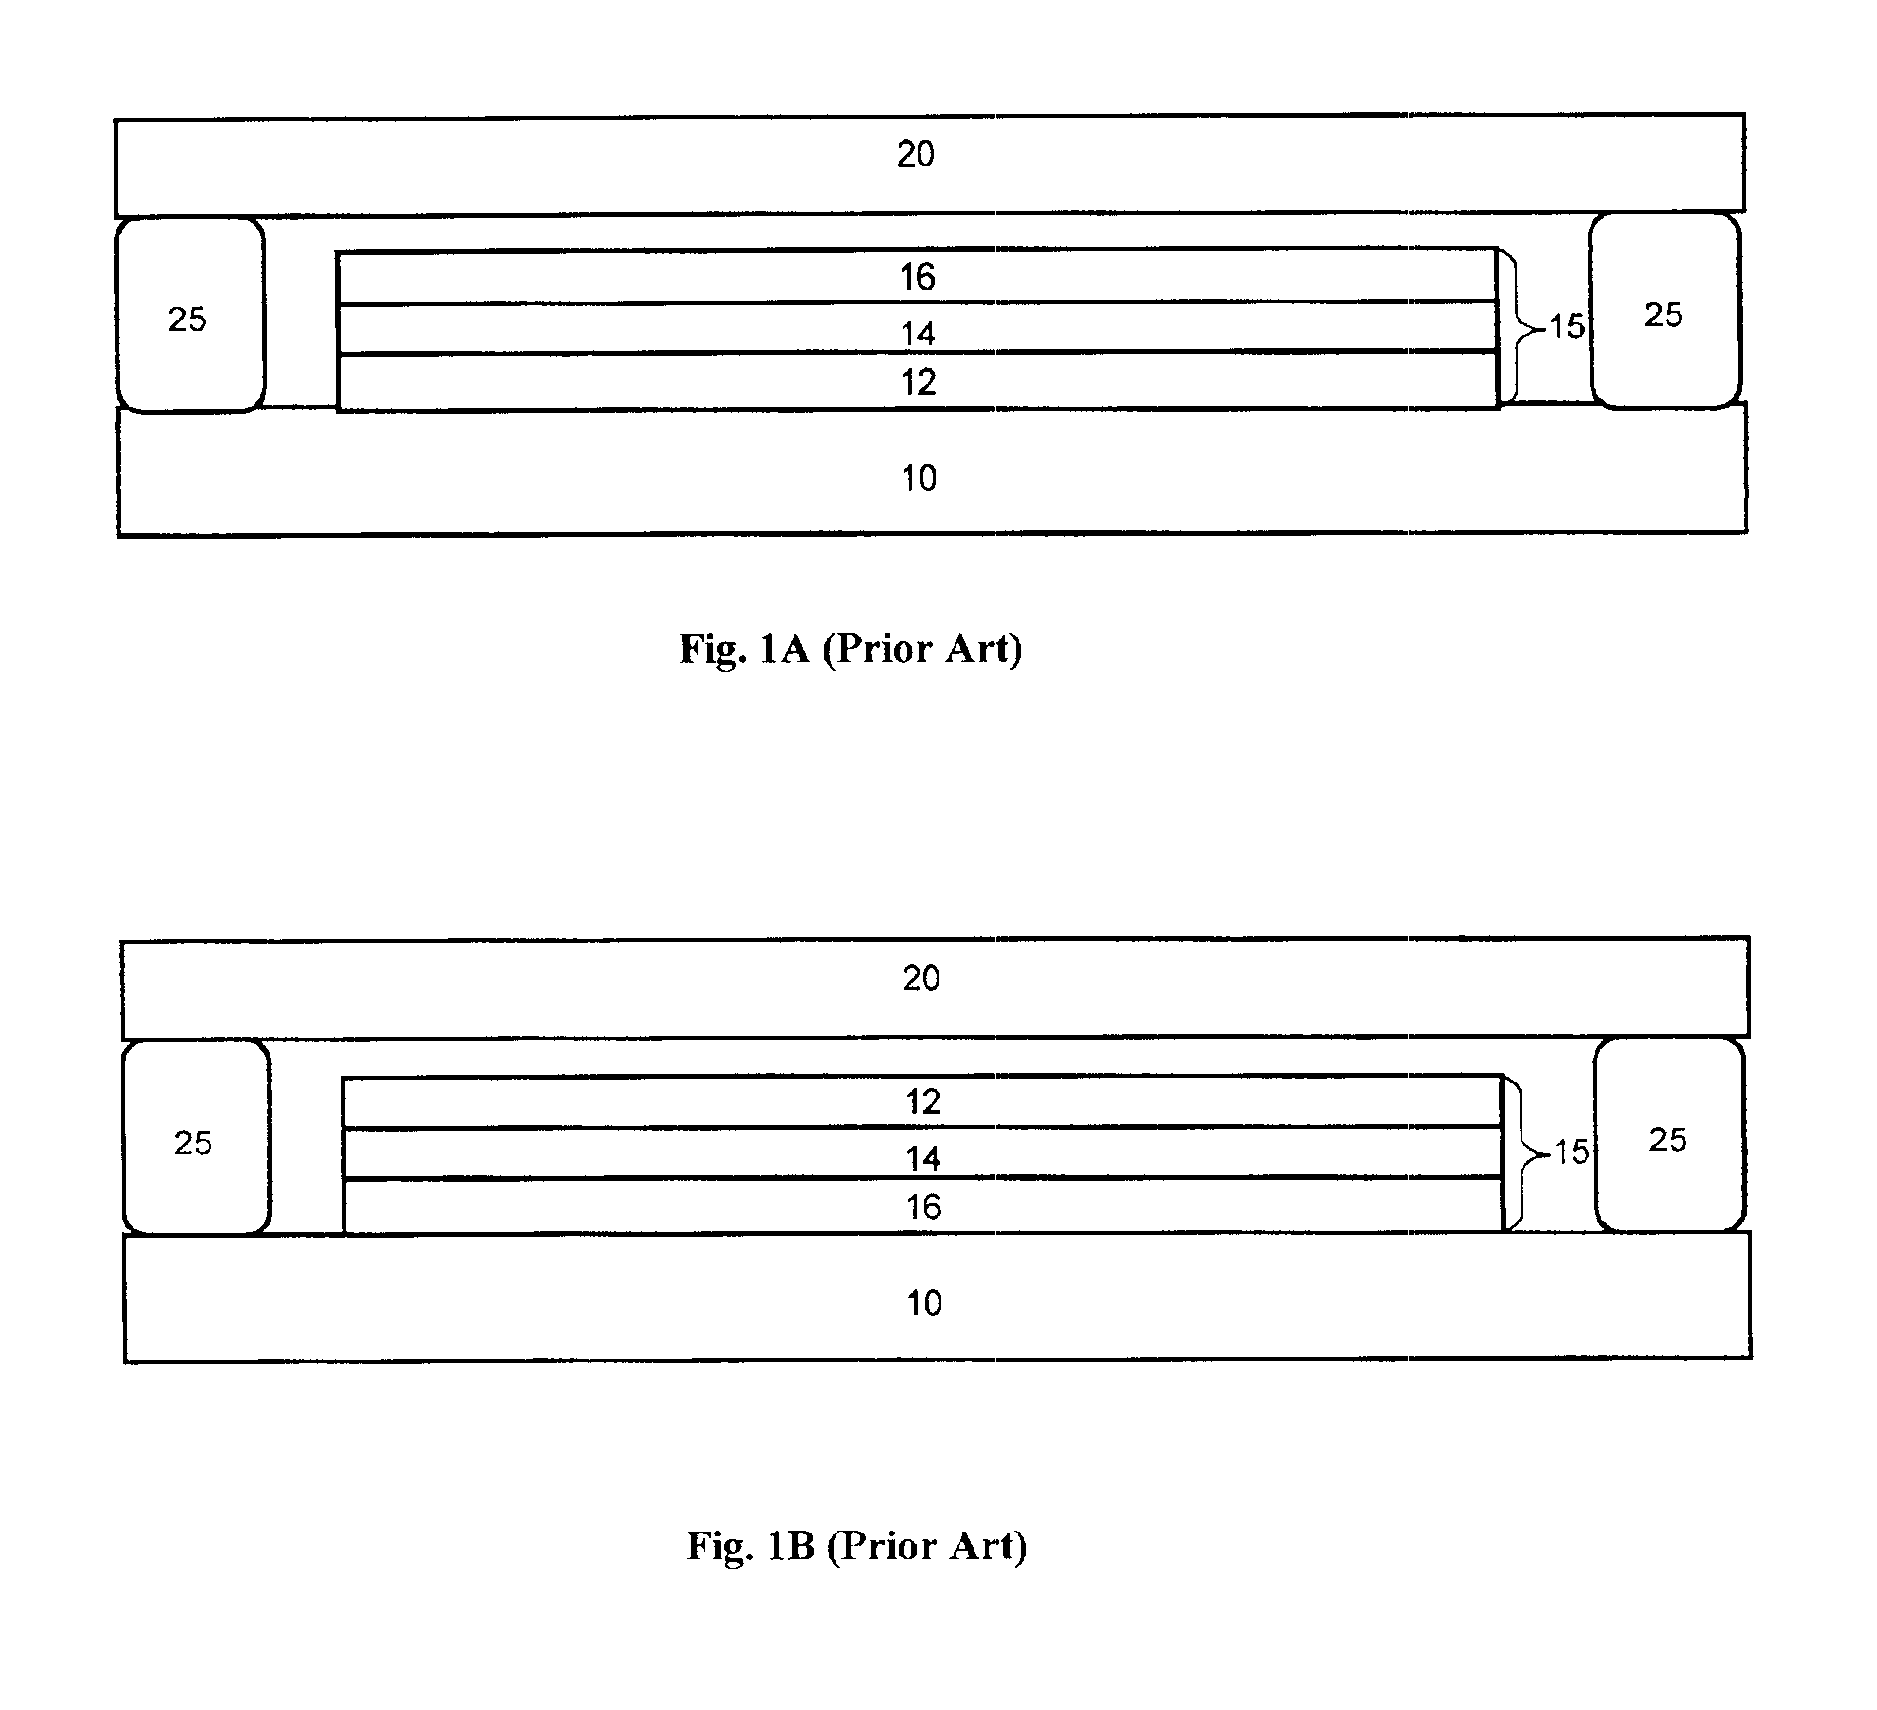 Patterned oxygen and moisture absorber for organic optoelectronic device structures